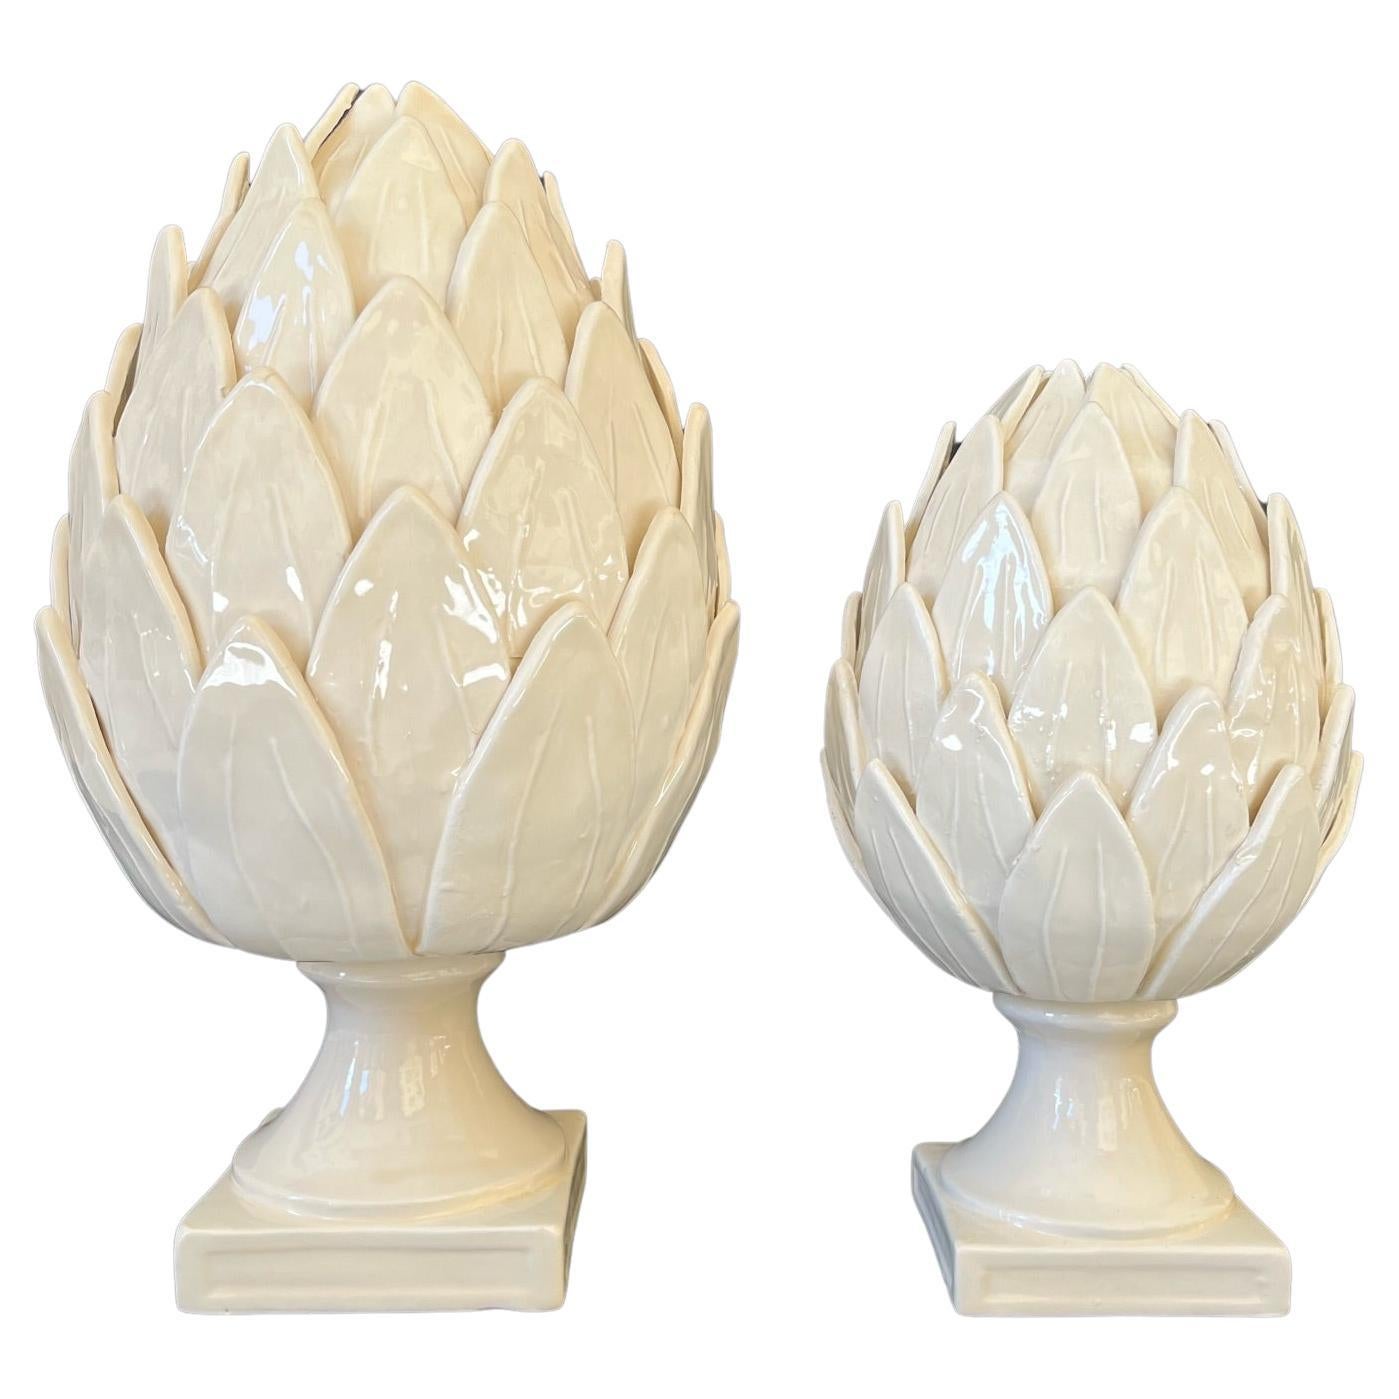 Pair of Big and Small White Artichokes For Sale